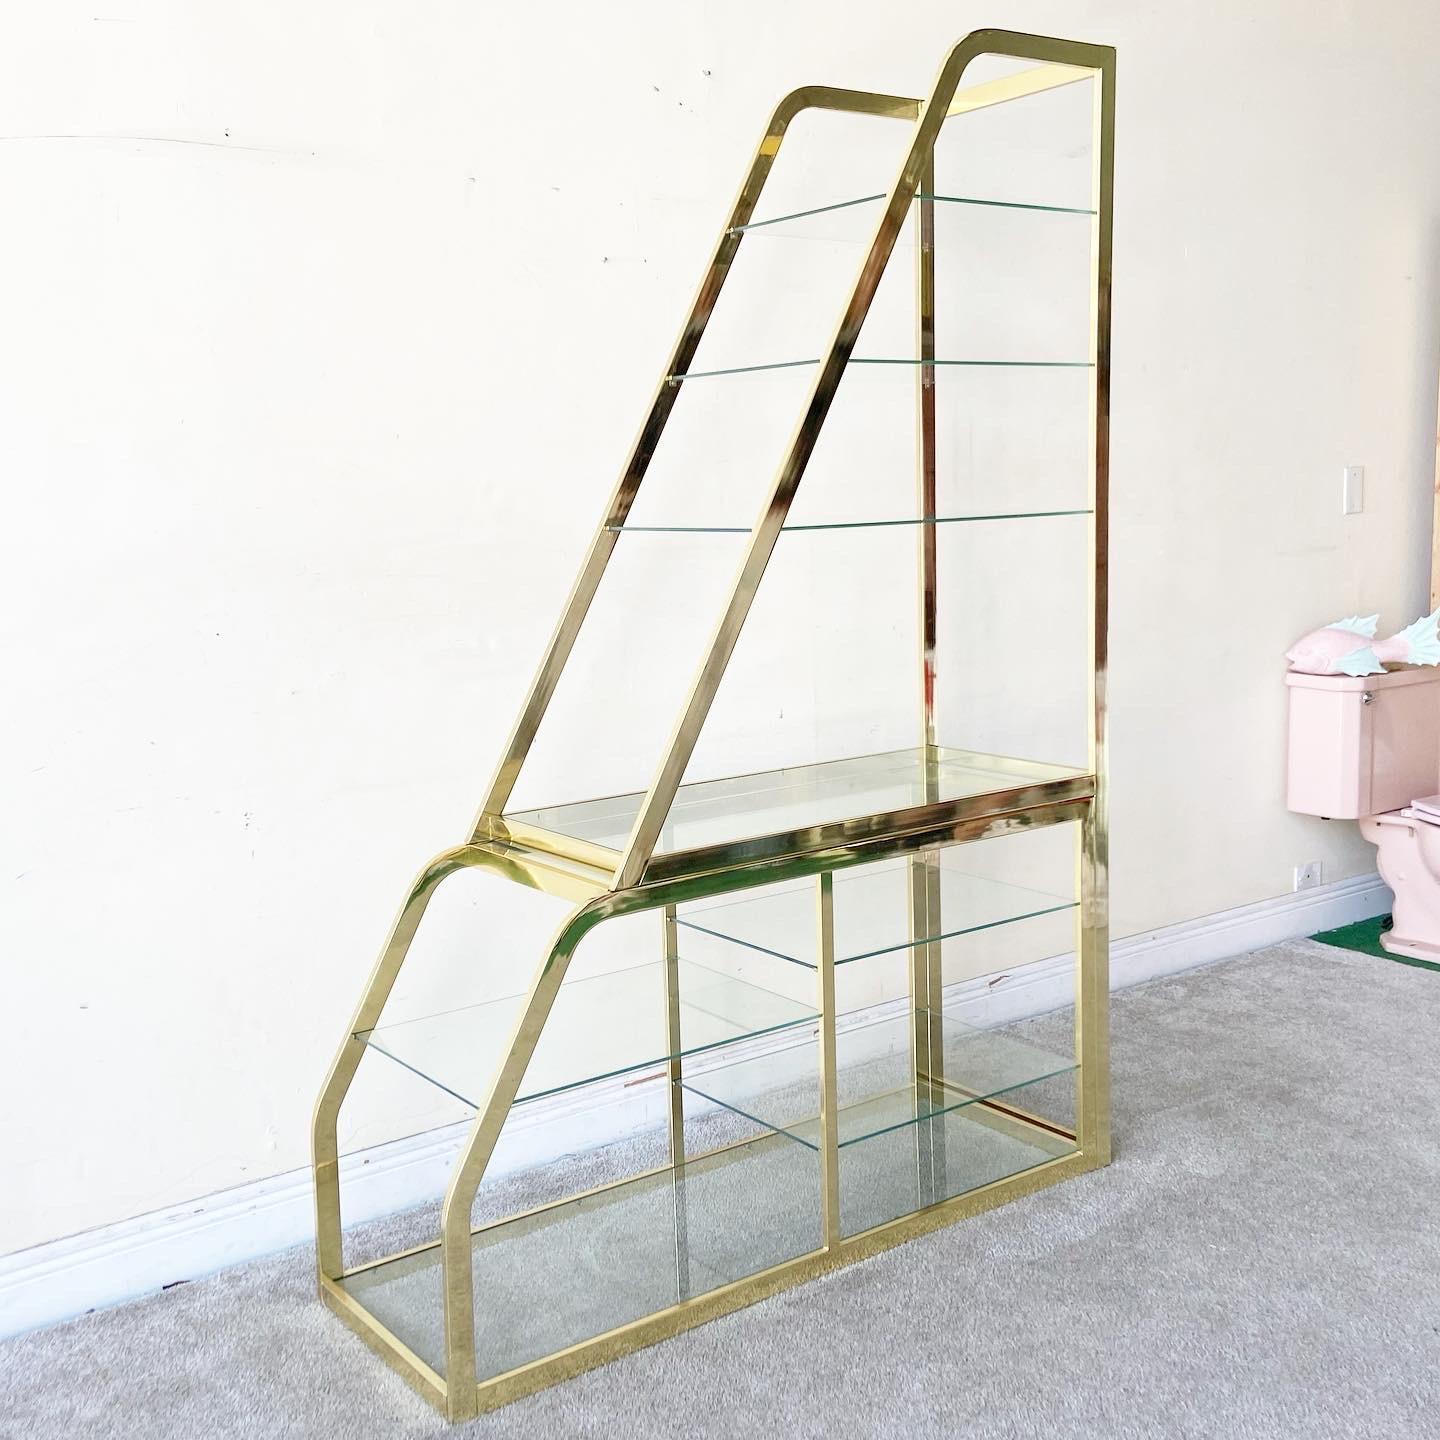 Excellent large extendable gold etagere by DIA. Features glass shelving and can be opened up to nearly double the width.

Extends to 89.75”W
Lower section measures 27.5”H.